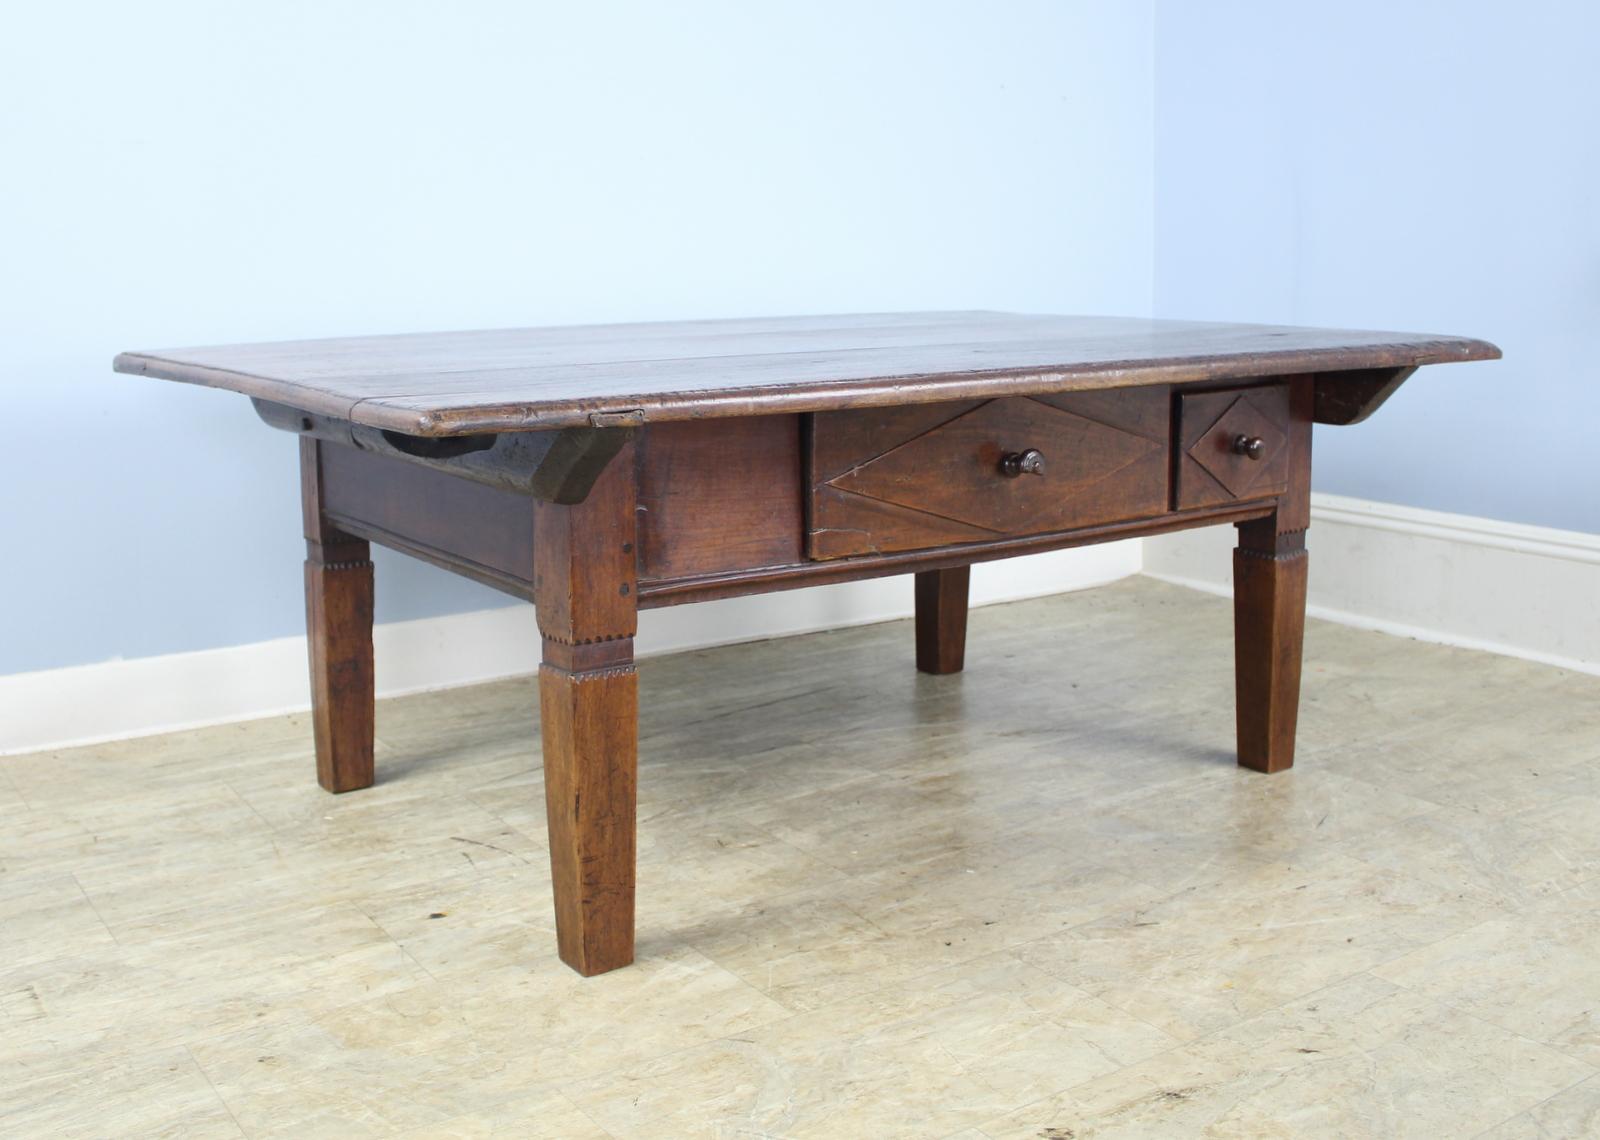 A handsome Alsacian cherry coffee table with a glossy, patinated top and sturdy tapered legs with carved detail. Nice deep cherry color and interesting grain. The unusual different size drawers on the front are unique and give an good look. One of